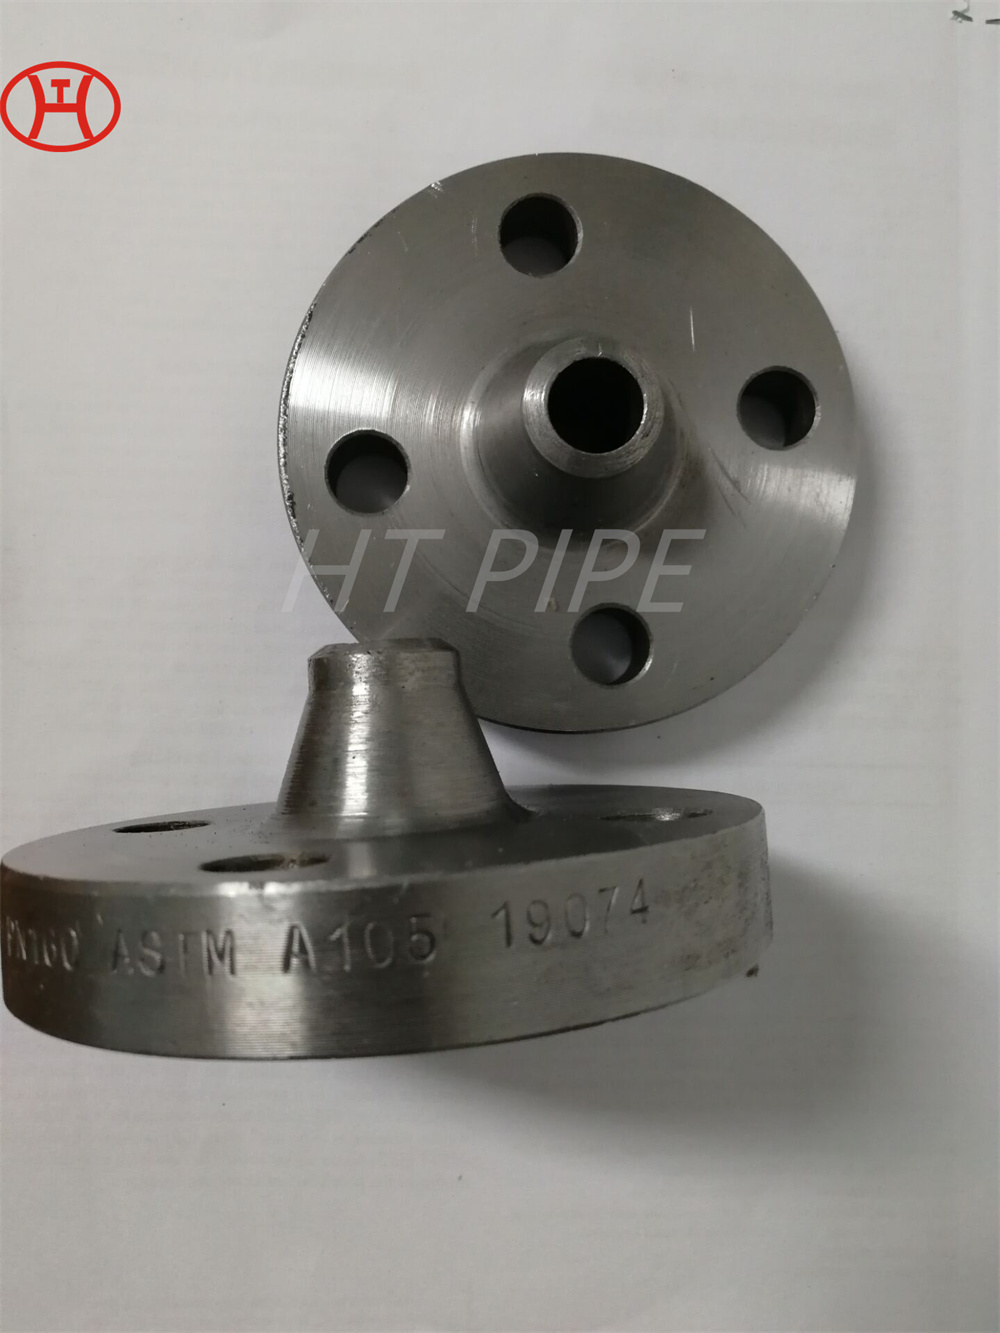 Hot Selling Flange Ss 316 1-2 #150 Th Npt Rf Asme B16.5 Stainless Steel Flanx